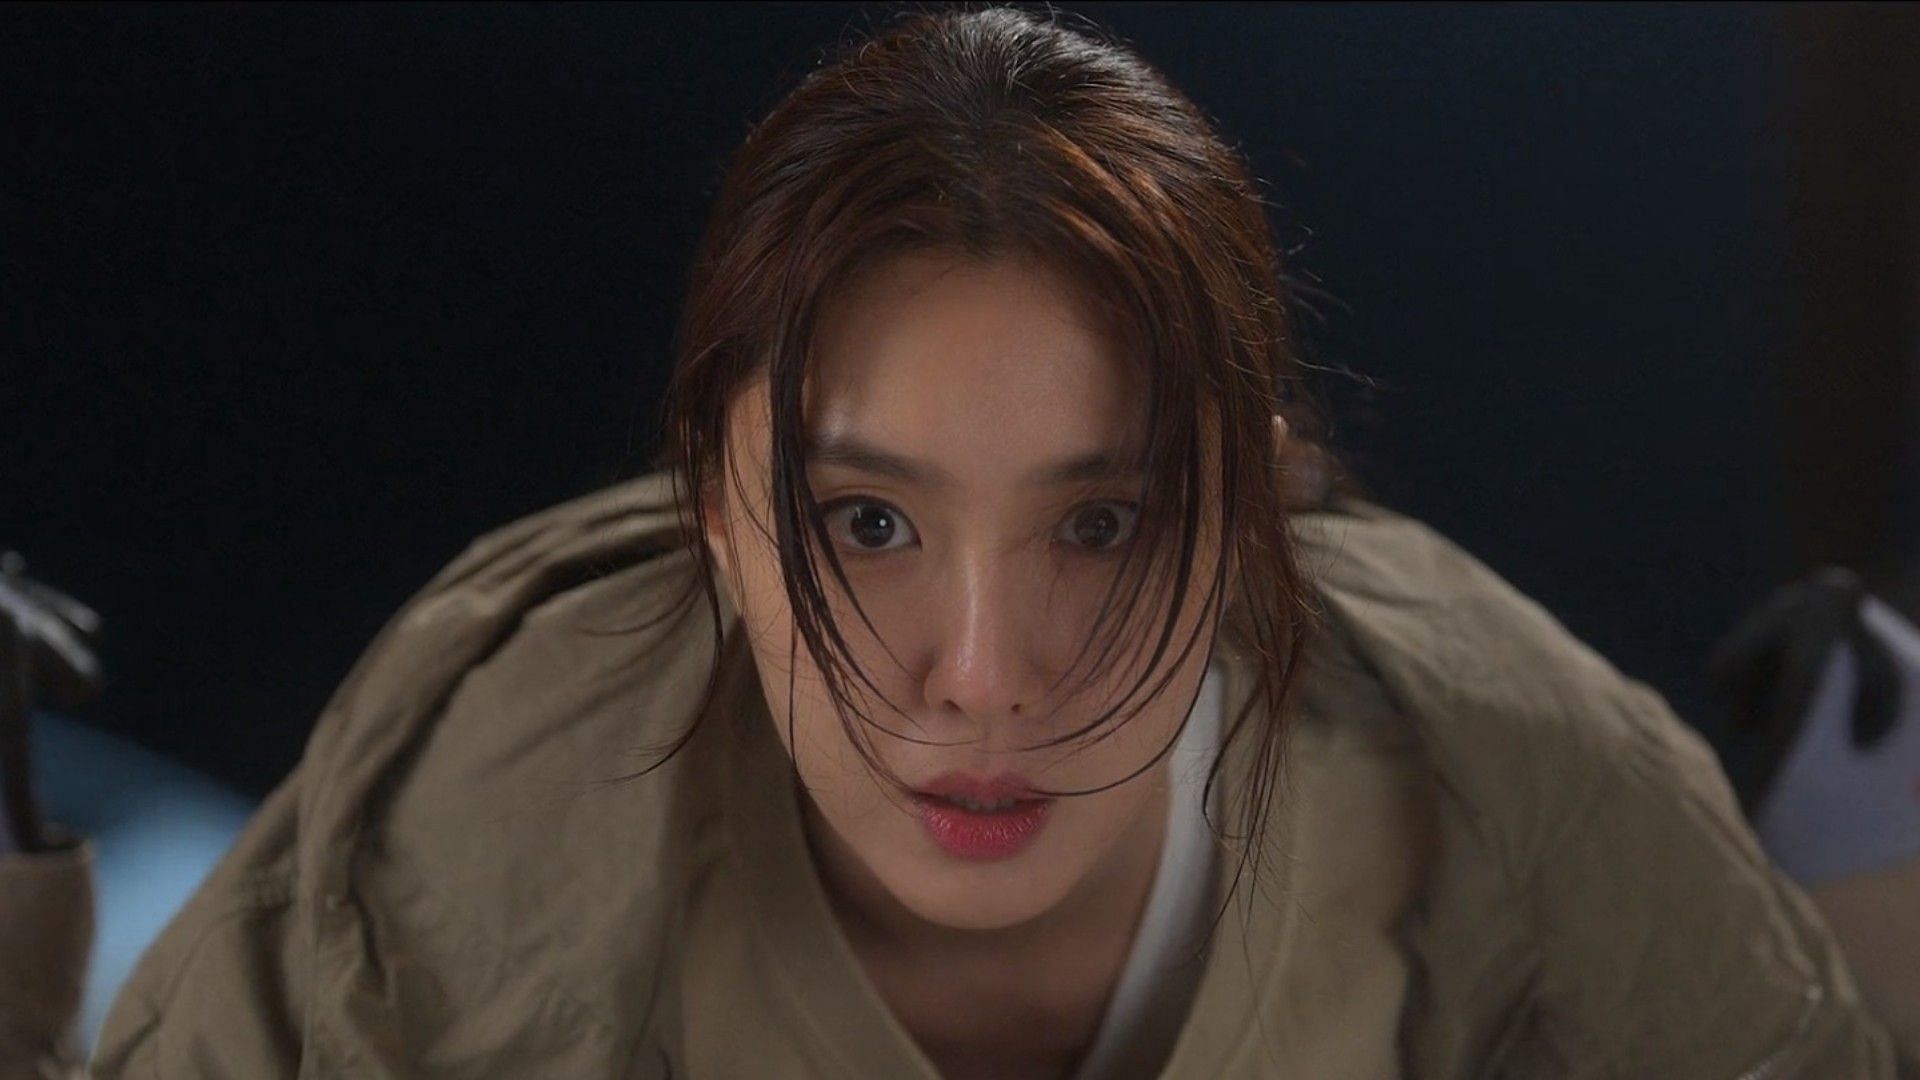 Ye-seul is shocked by the future that, for the first time, includes her (Image via Disney+)